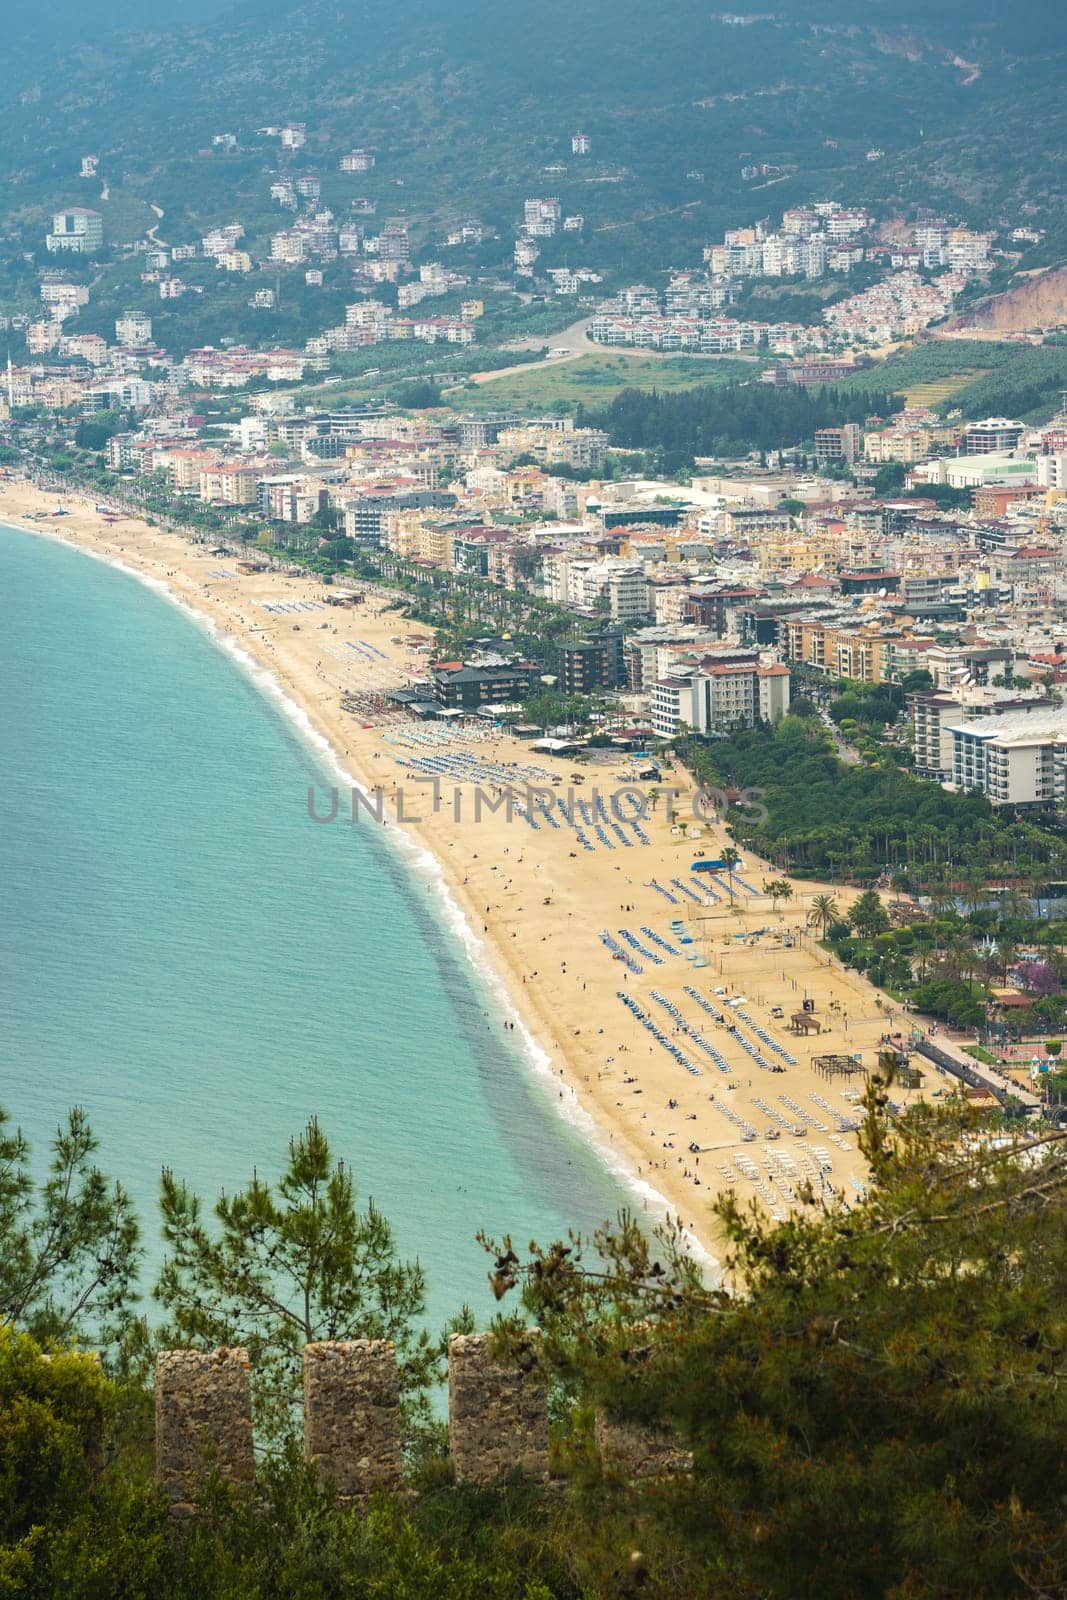 View of Cleopatra beach in Alanya, one of the touristic districts of Antalya, from Alanya Castle by Sonat